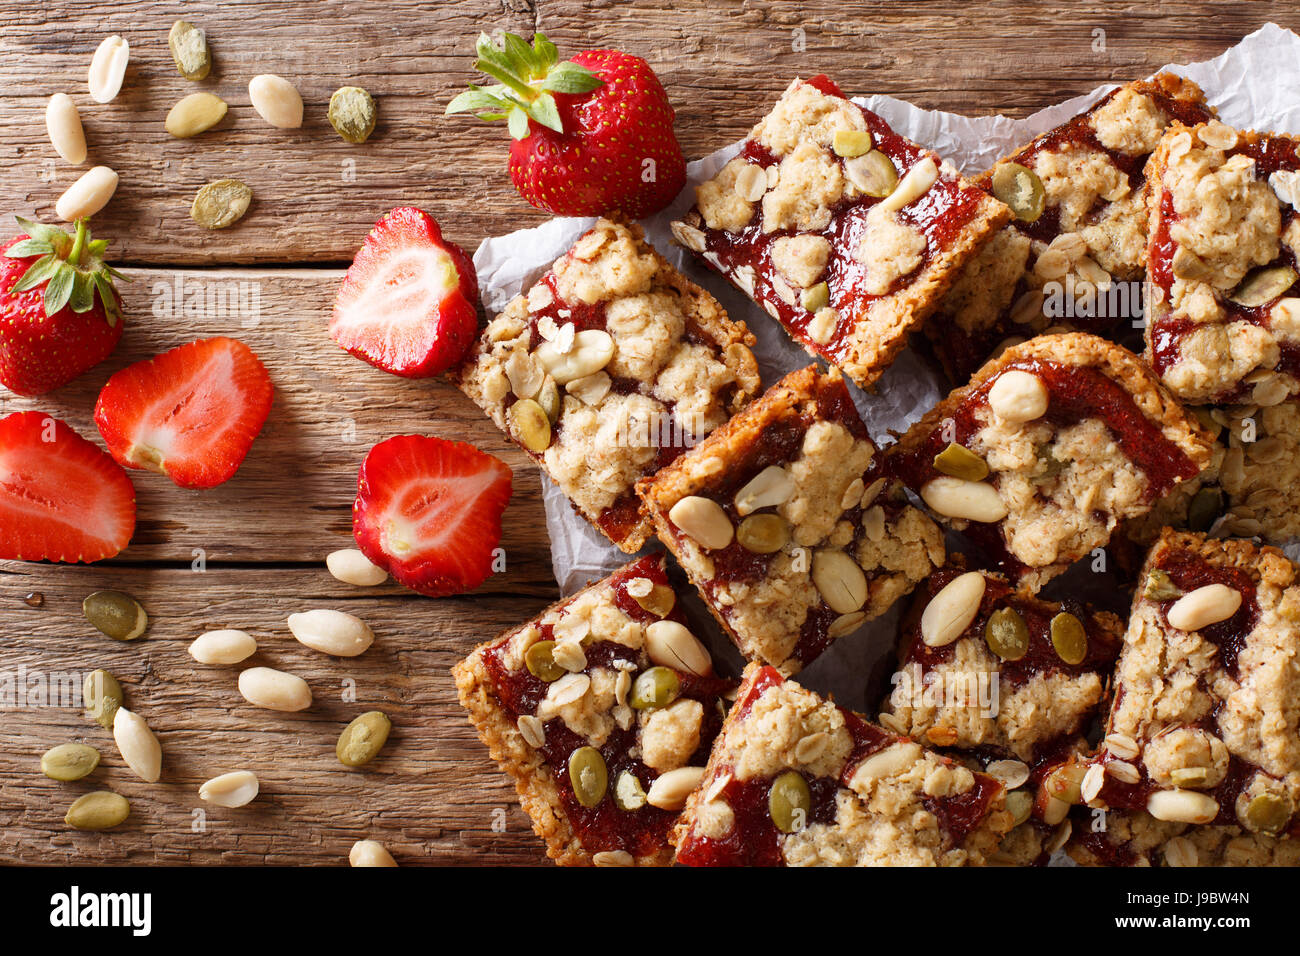 Oat bars with strawberries, seeds and nuts close-up on the table. horizontal view from above Stock Photo